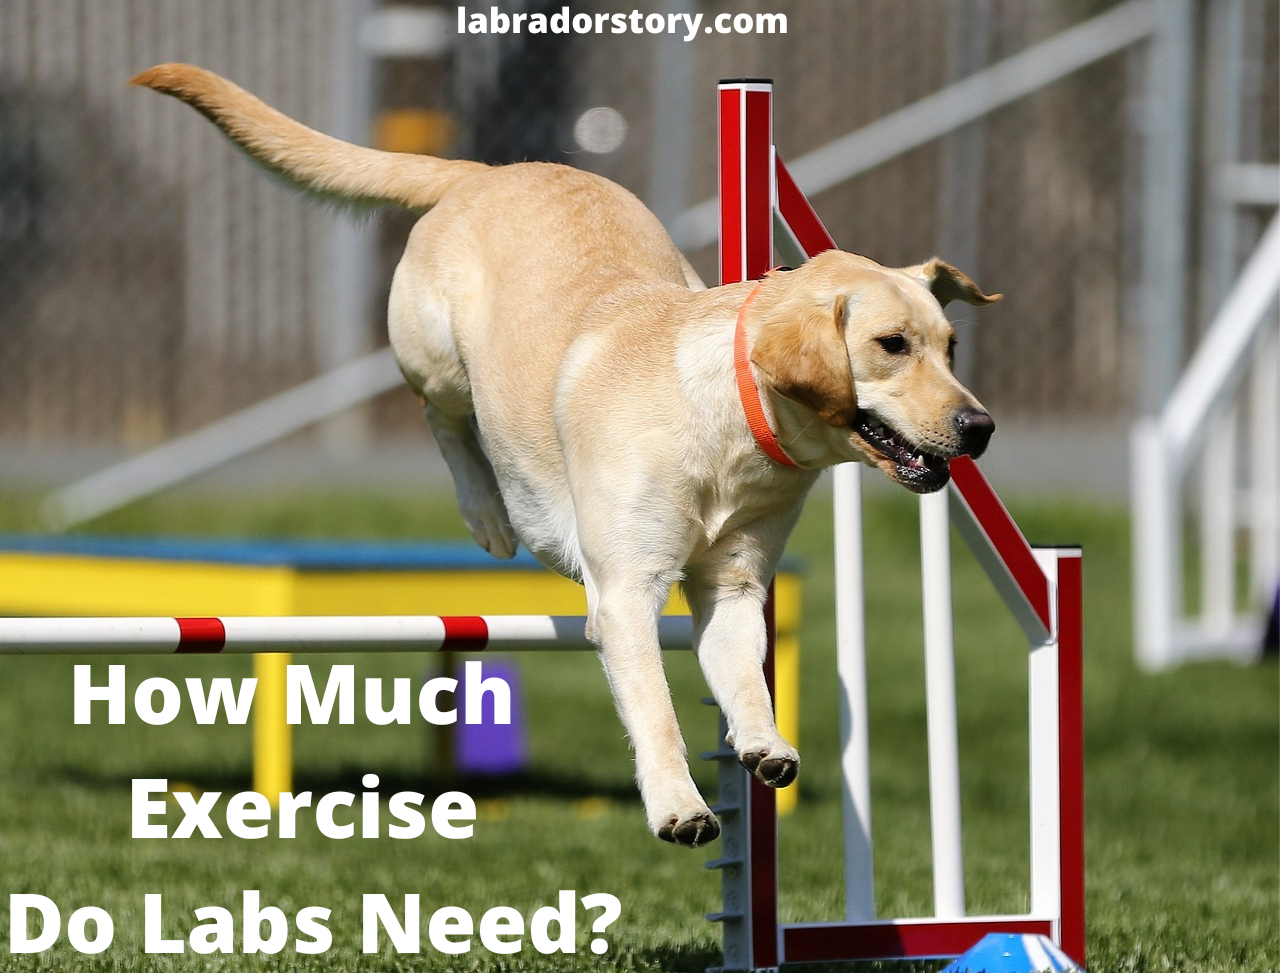 How Much Exercise Do Labs Need To Stay Healthy And Fit?